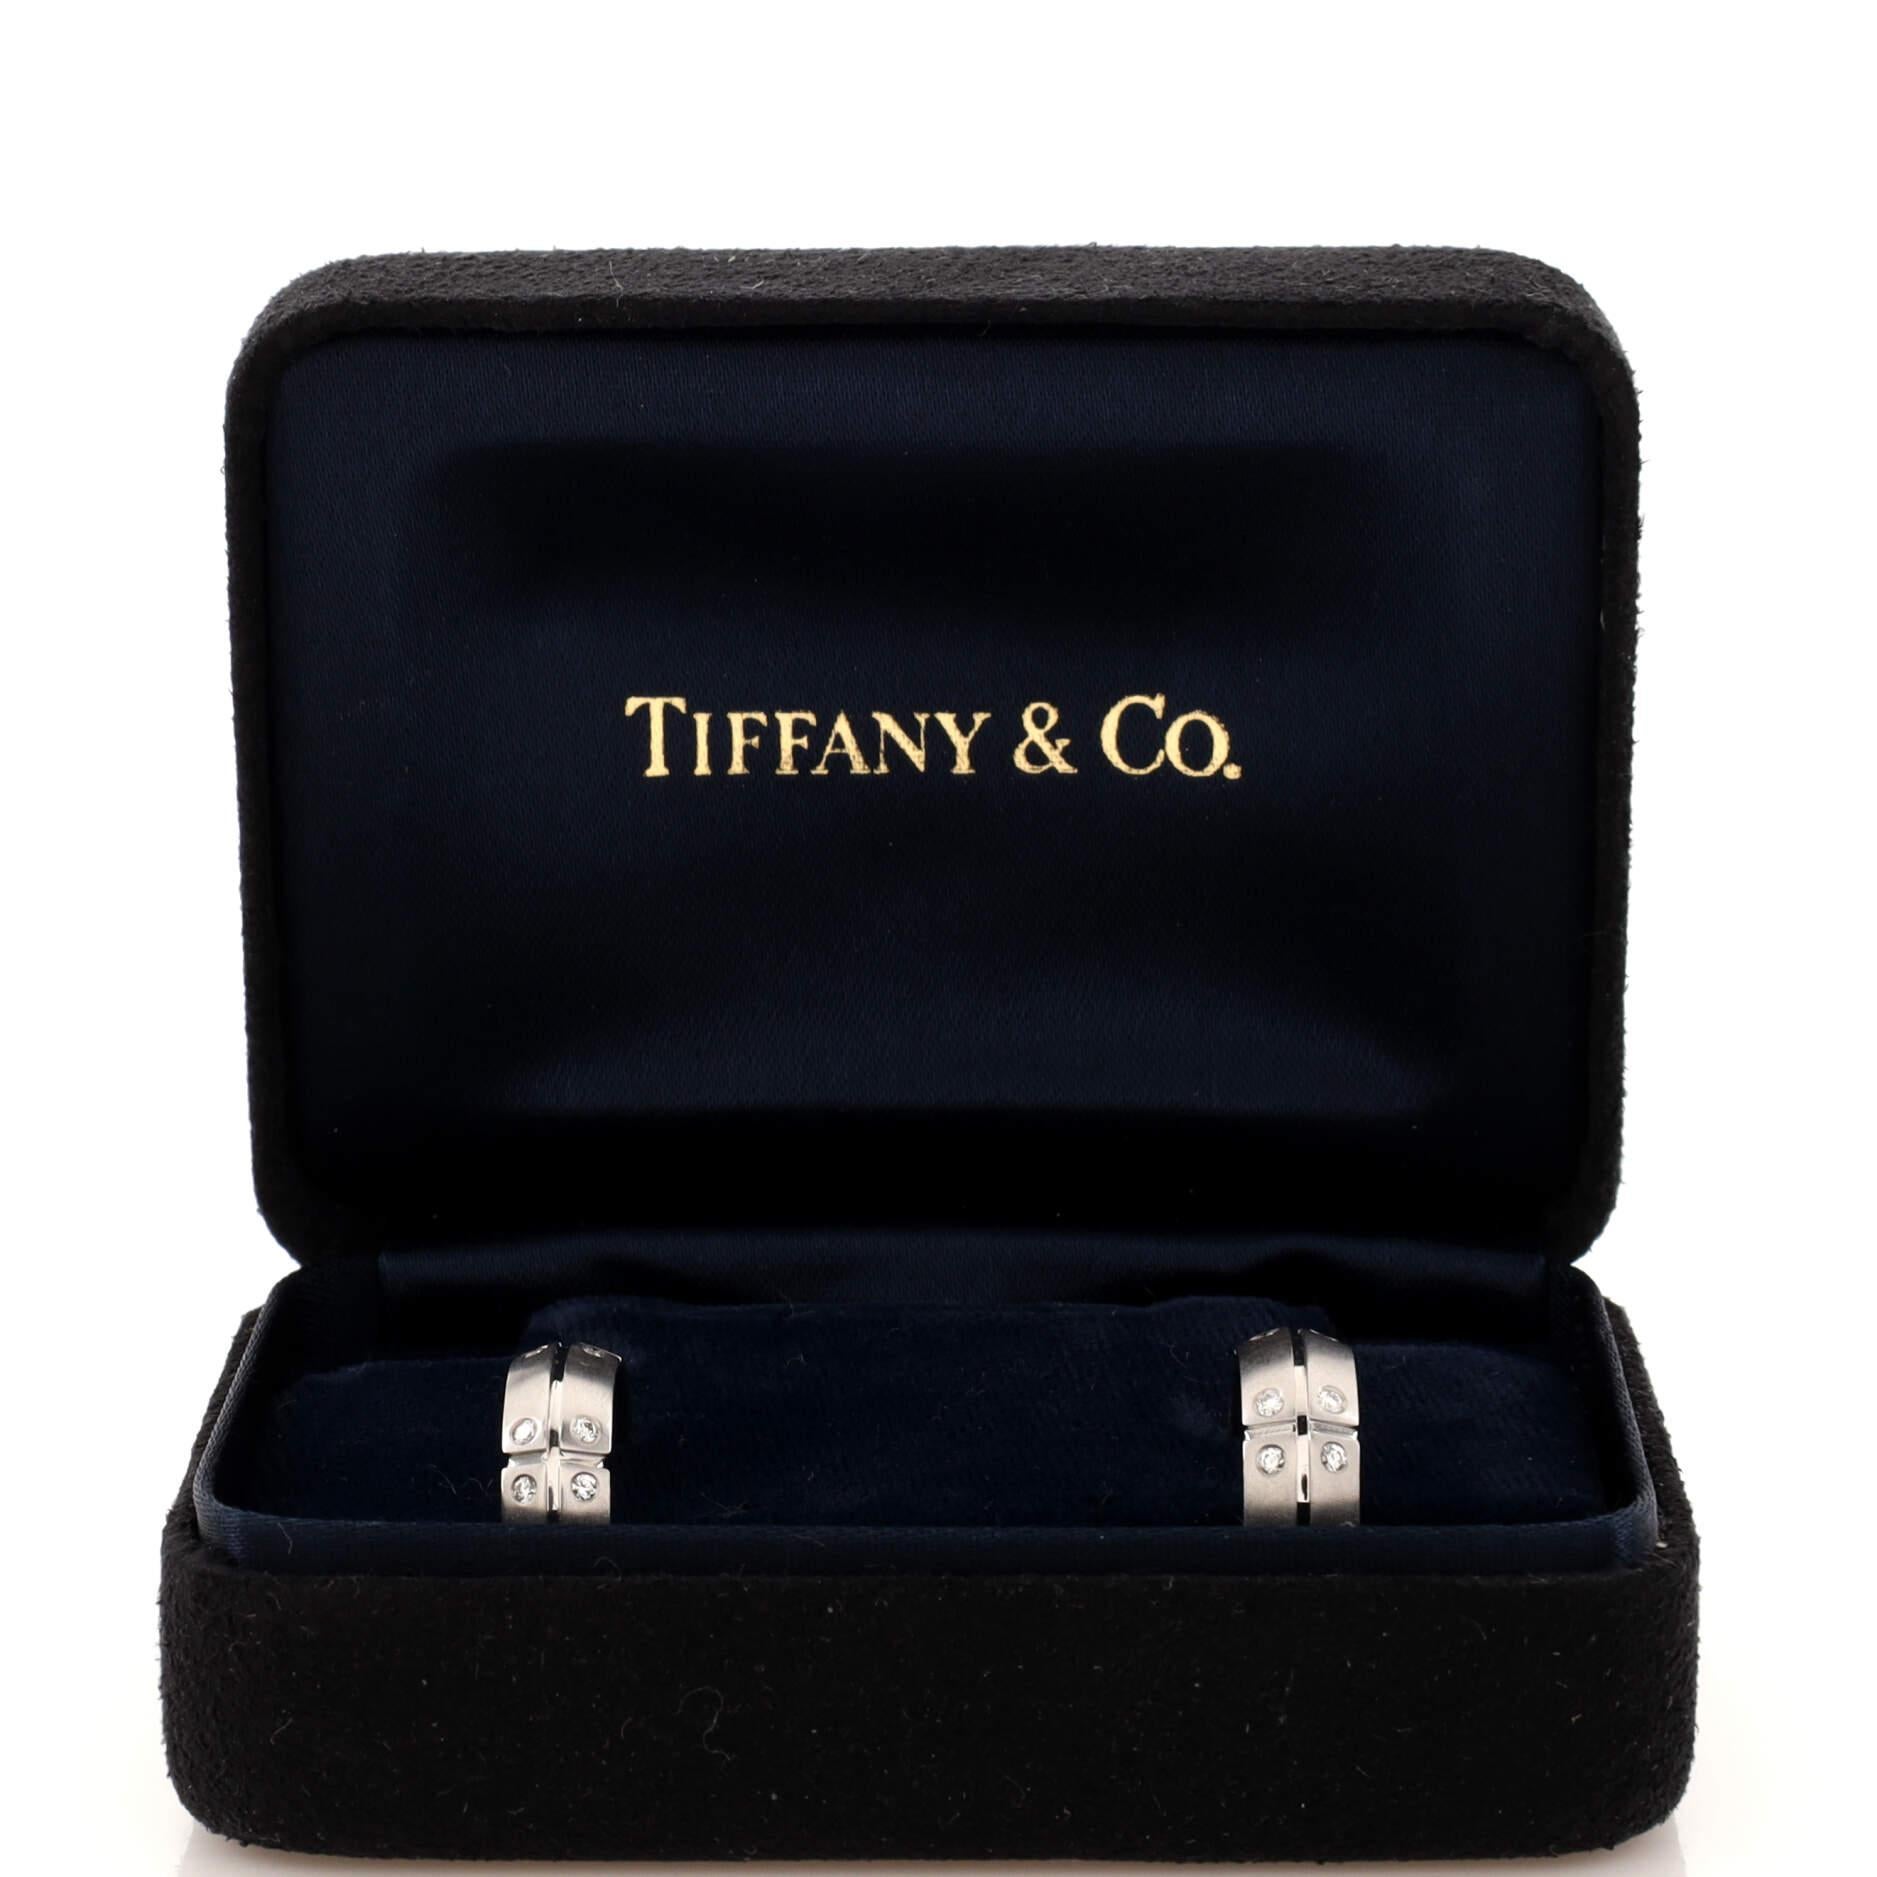 Condition: Great. Minor wear throughout.
Accessories: No Accessories
Measurements: Height/Length: 17.15 mm, Width: 6.00 mm
Designer: Tiffany & Co.
Model: Streamerica Hoop Earrings 18K White Gold with Diamonds
Exterior Color: White Gold
Item Number: